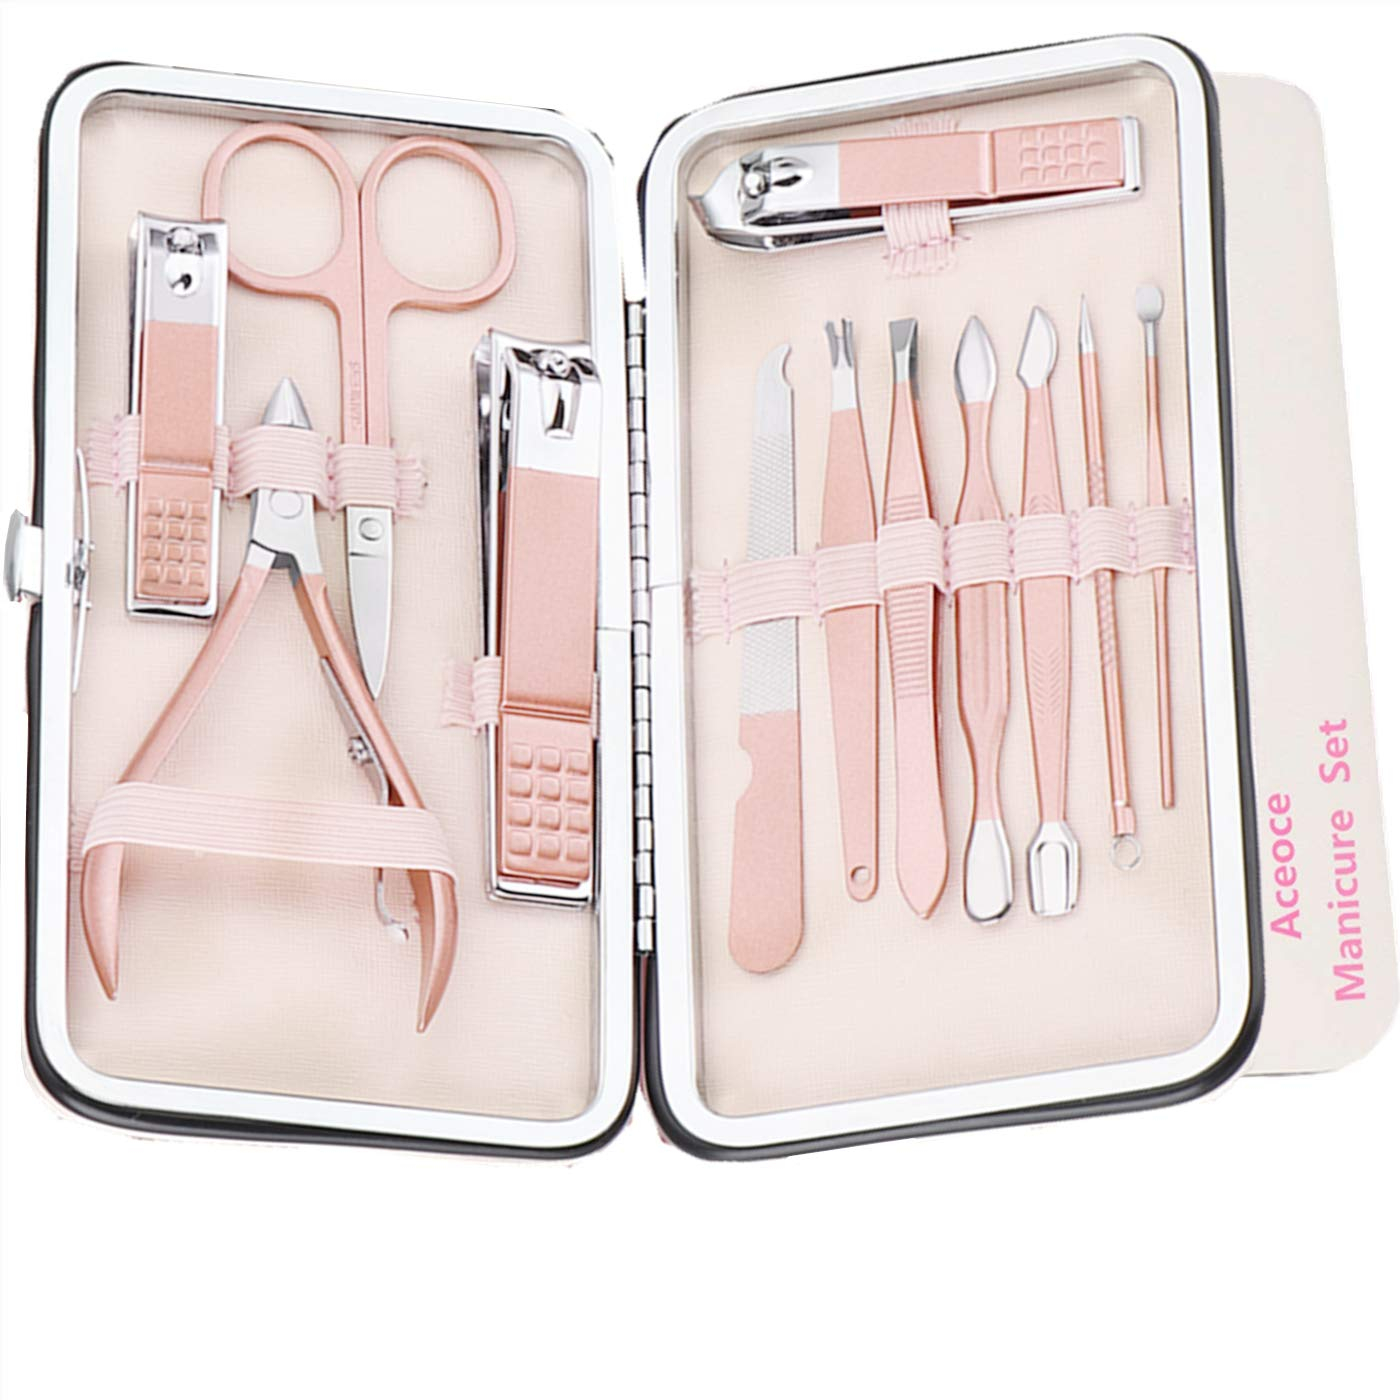 Manicure Pedicure Kit Manicure Set Women Professional Stainless Steel Pedicure Nail Clipper Tools Aceoce Travel Luxury 18 in 1 With Grooming Travel Leather